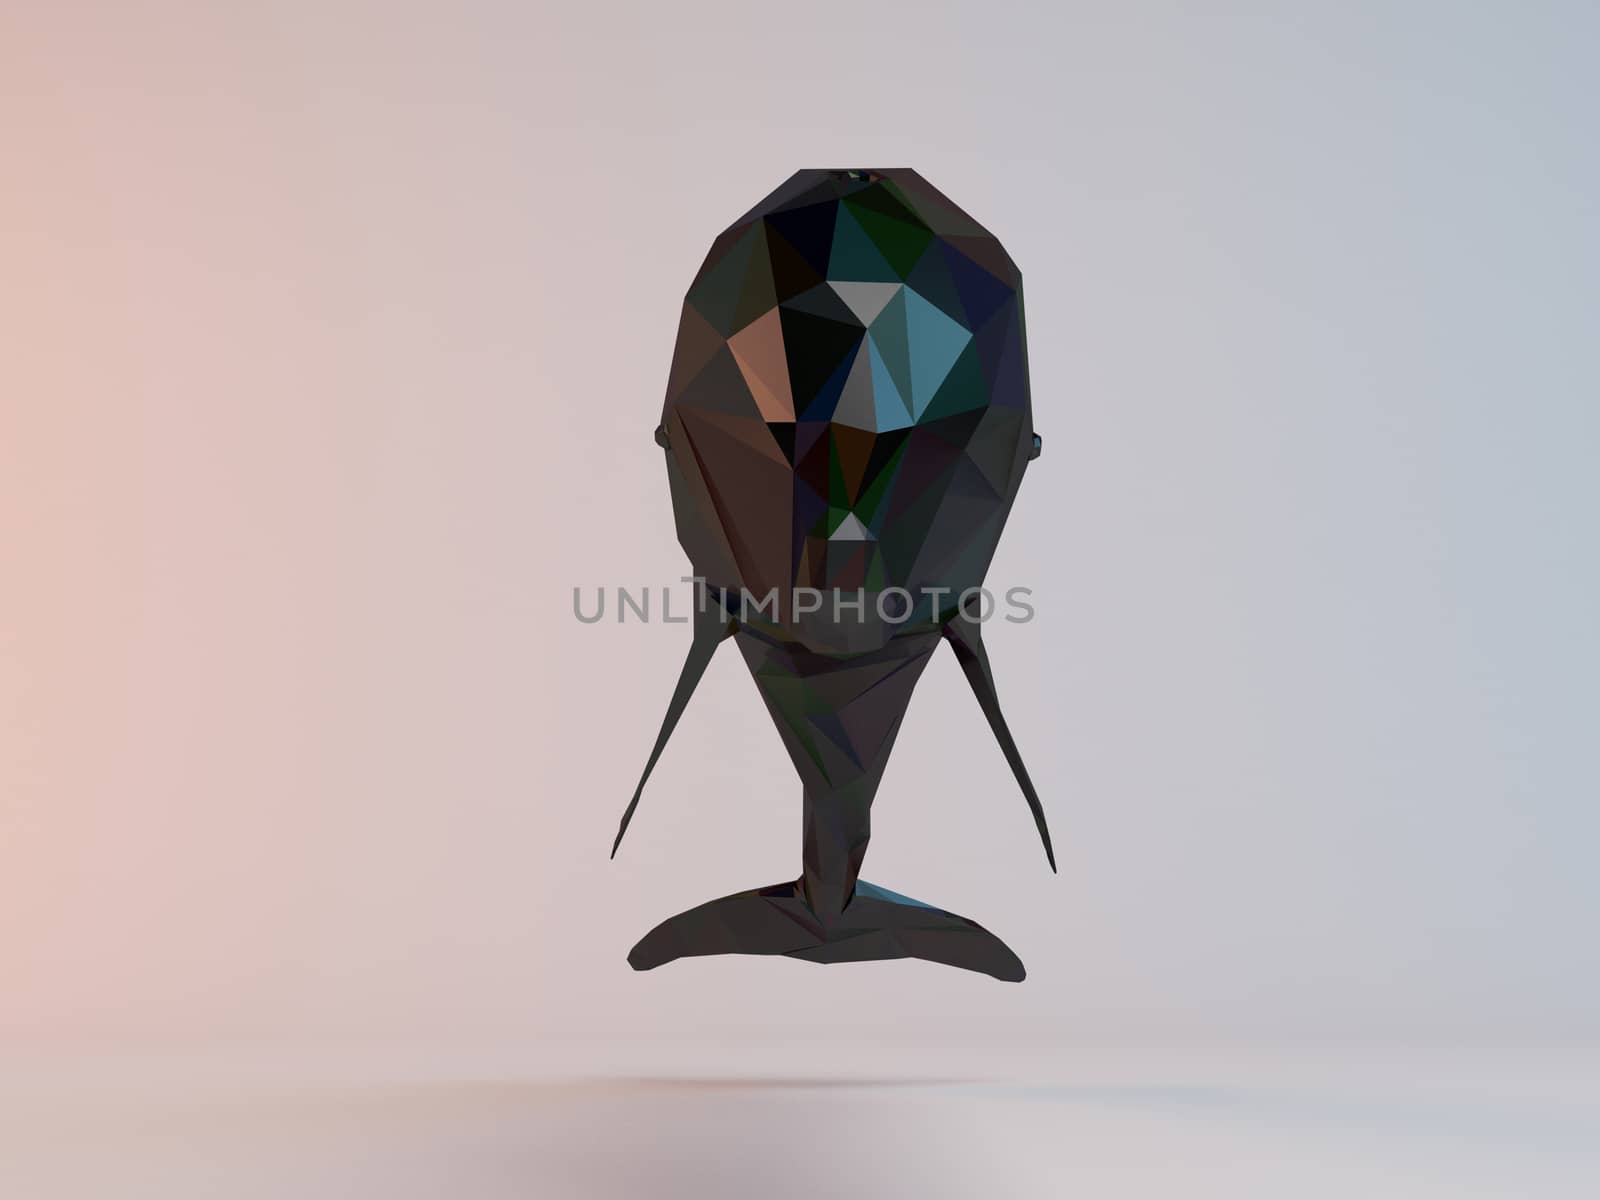 3D black low poly (dolphin) inside a white stage with high render quality to be used as a logo, medal, symbol, shape, emblem, icon, children story, or any other use.